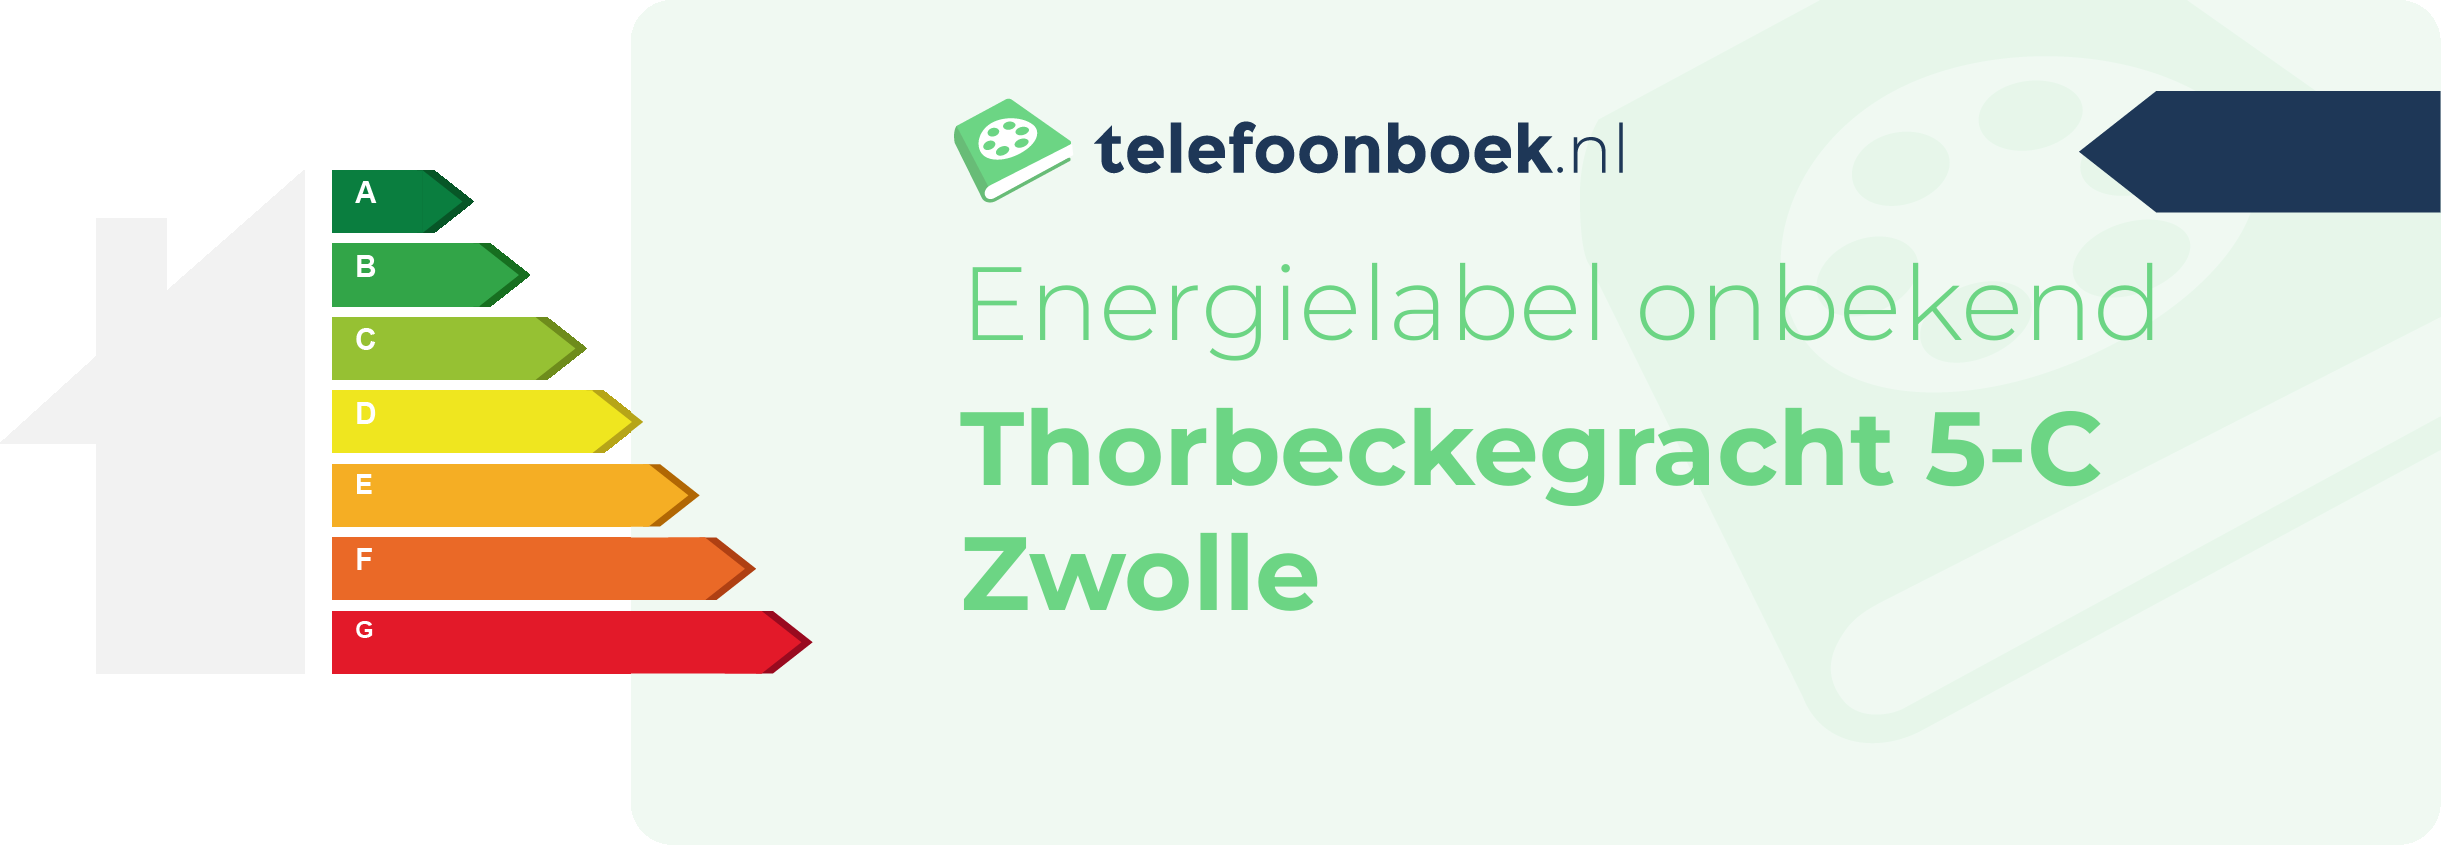 Energielabel Thorbeckegracht 5-C Zwolle